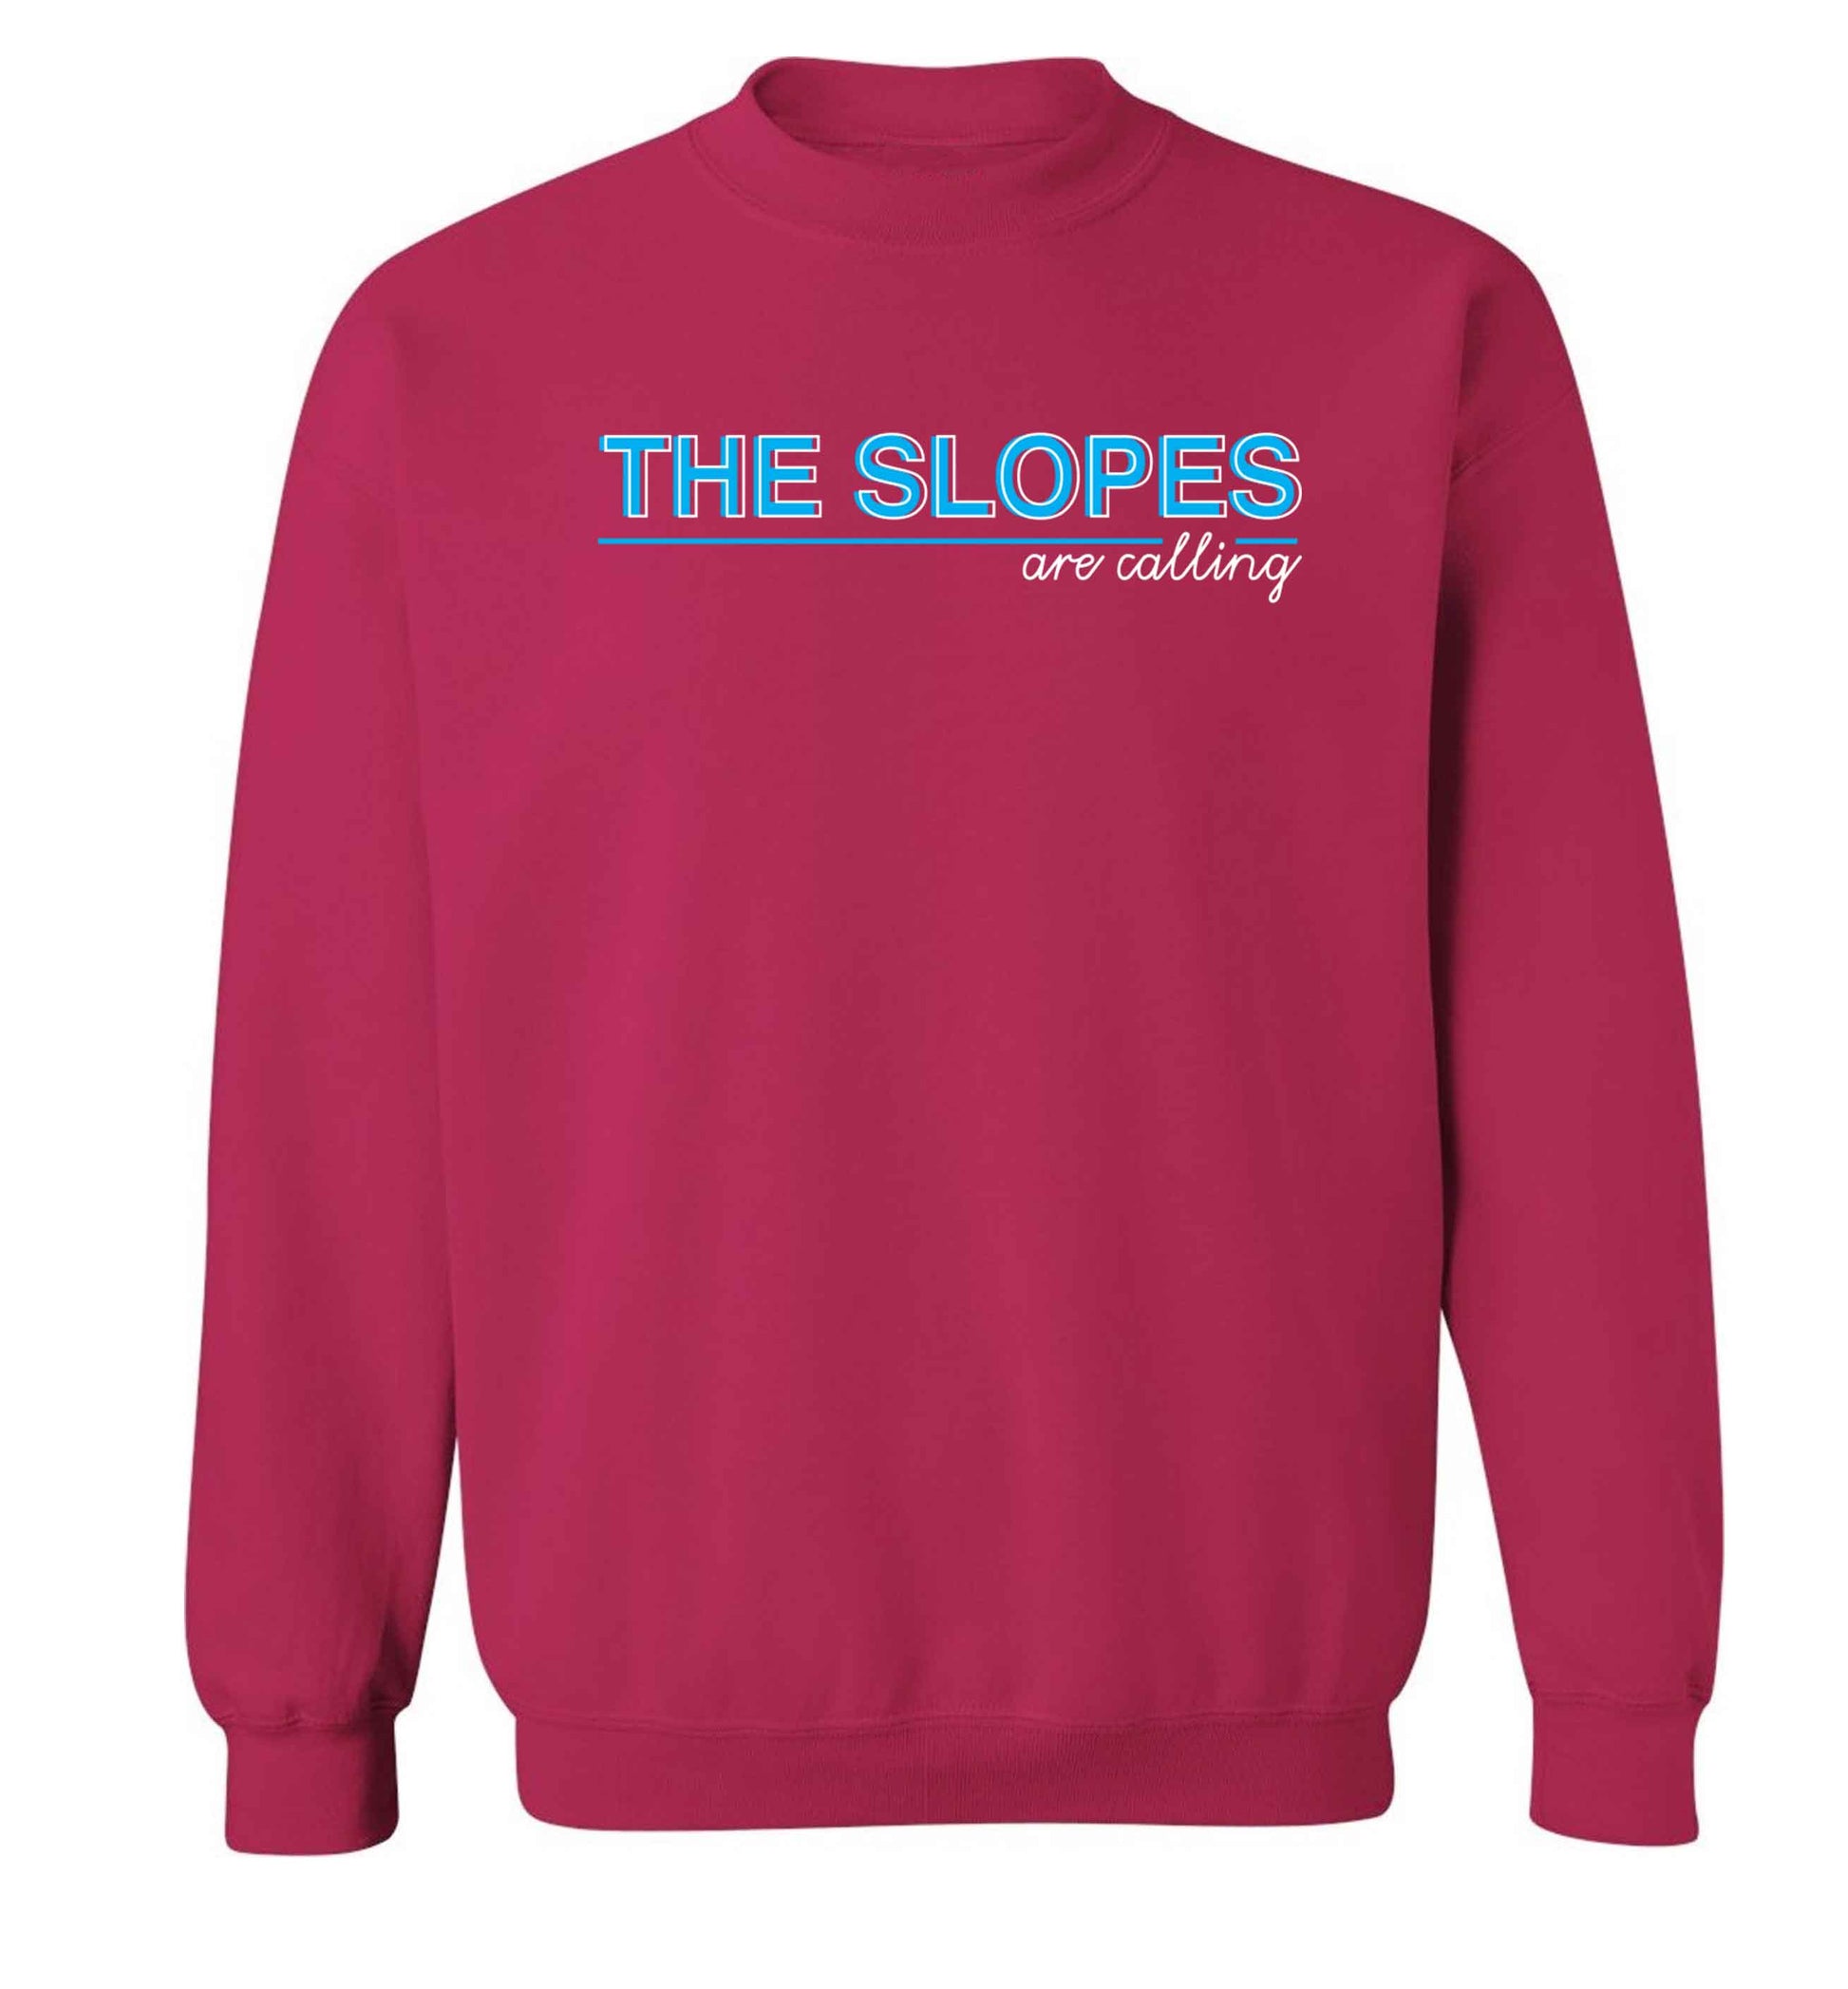 The slopes are calling Adult's unisex pink Sweater 2XL